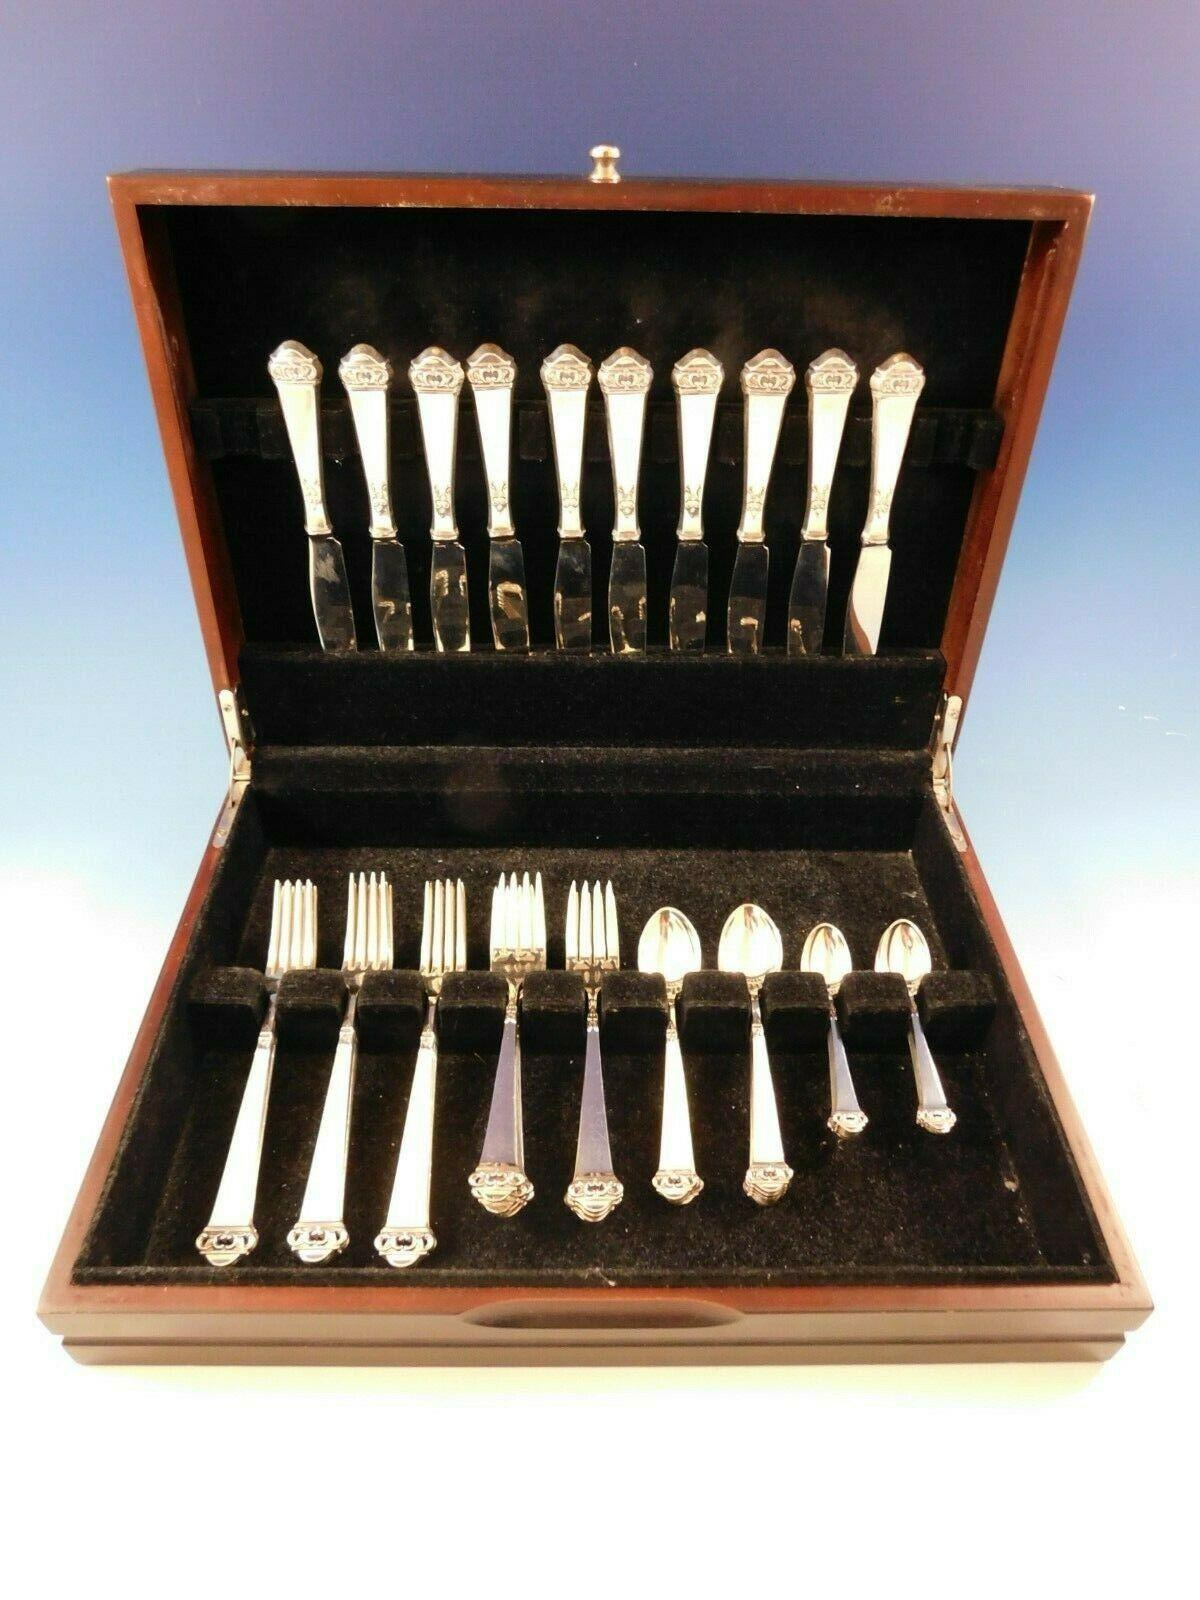 Saga by Mylius Brodrene 830 silver Norwegian flatware set, 50 pieces. The company began in 1932 in Krager, in the south of Norway and closed its doors in 2008. This pattern has a pierced finial on a plain squared handle. This set includes:

 10